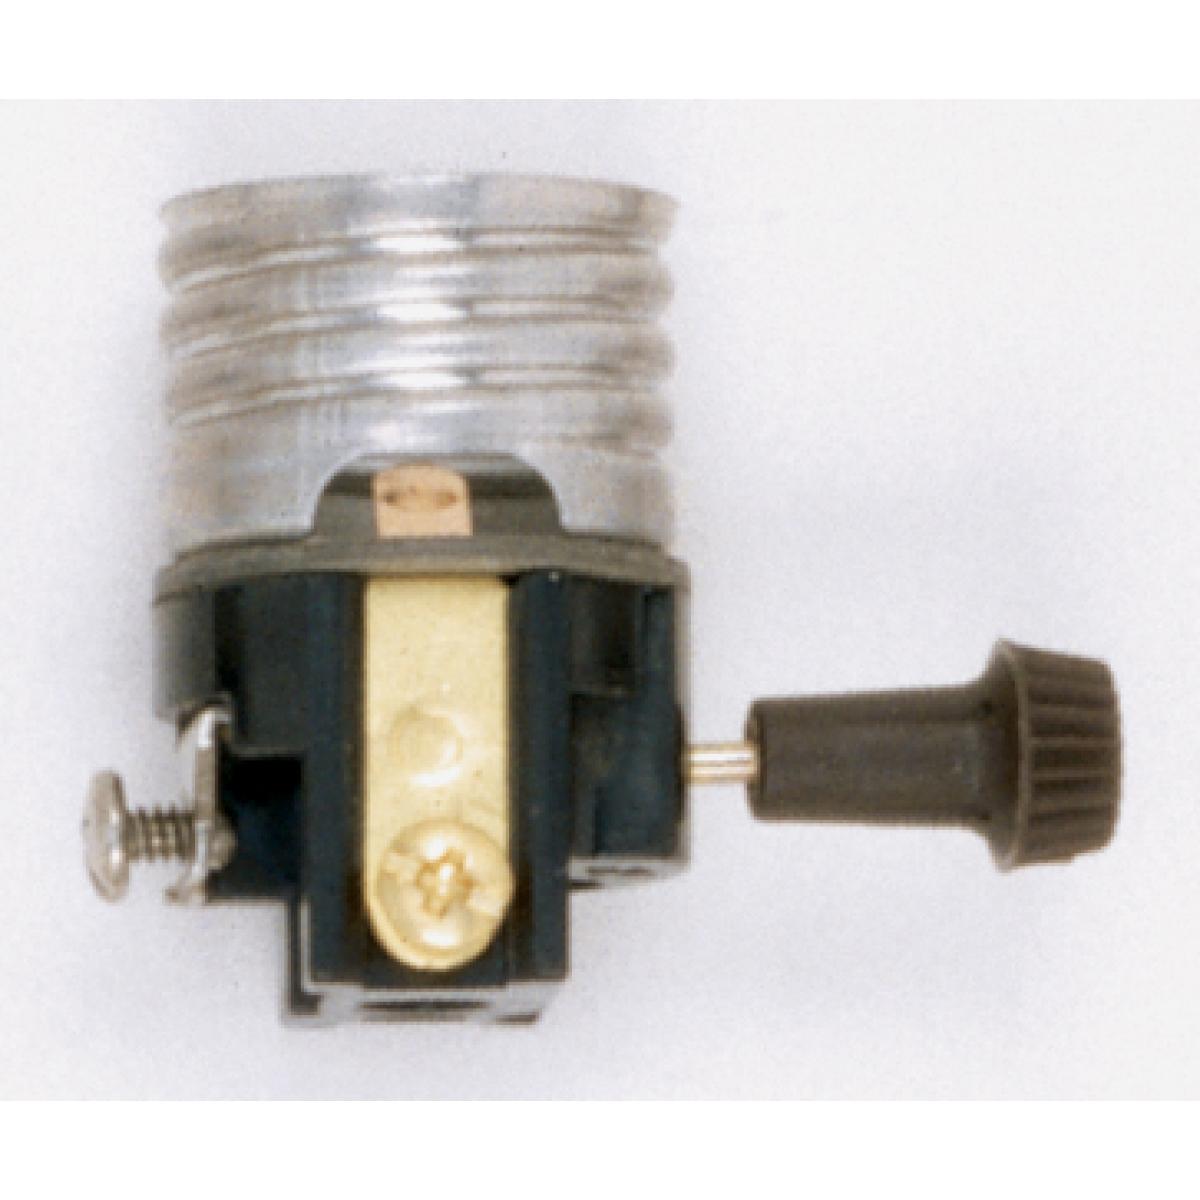 90-1143 3 WIRE 2 CIRCUIT SOCKET INT. O